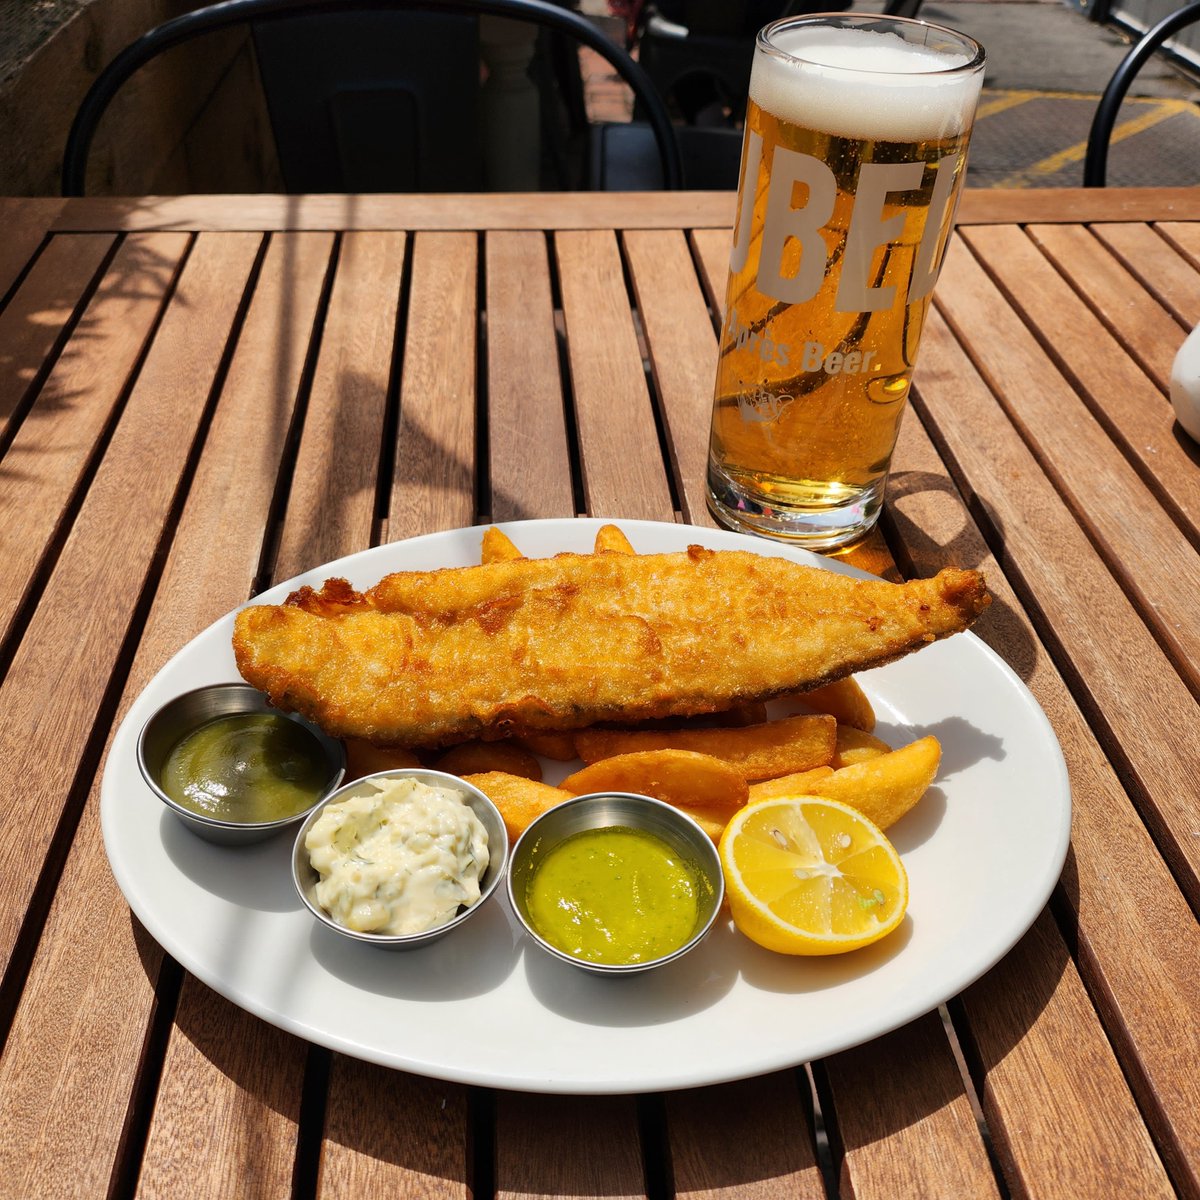 It's Fridayyy, which means it's time for pub classics

Fish & Chips with a pint, can you get more Britsh than that? 🇬🇧

Also, has anyone tried our recently added Jubel Grapefruit? Perfect for these sunny afternoons

#Durellarms #Summer #pubclassics #fishandchips #jubel